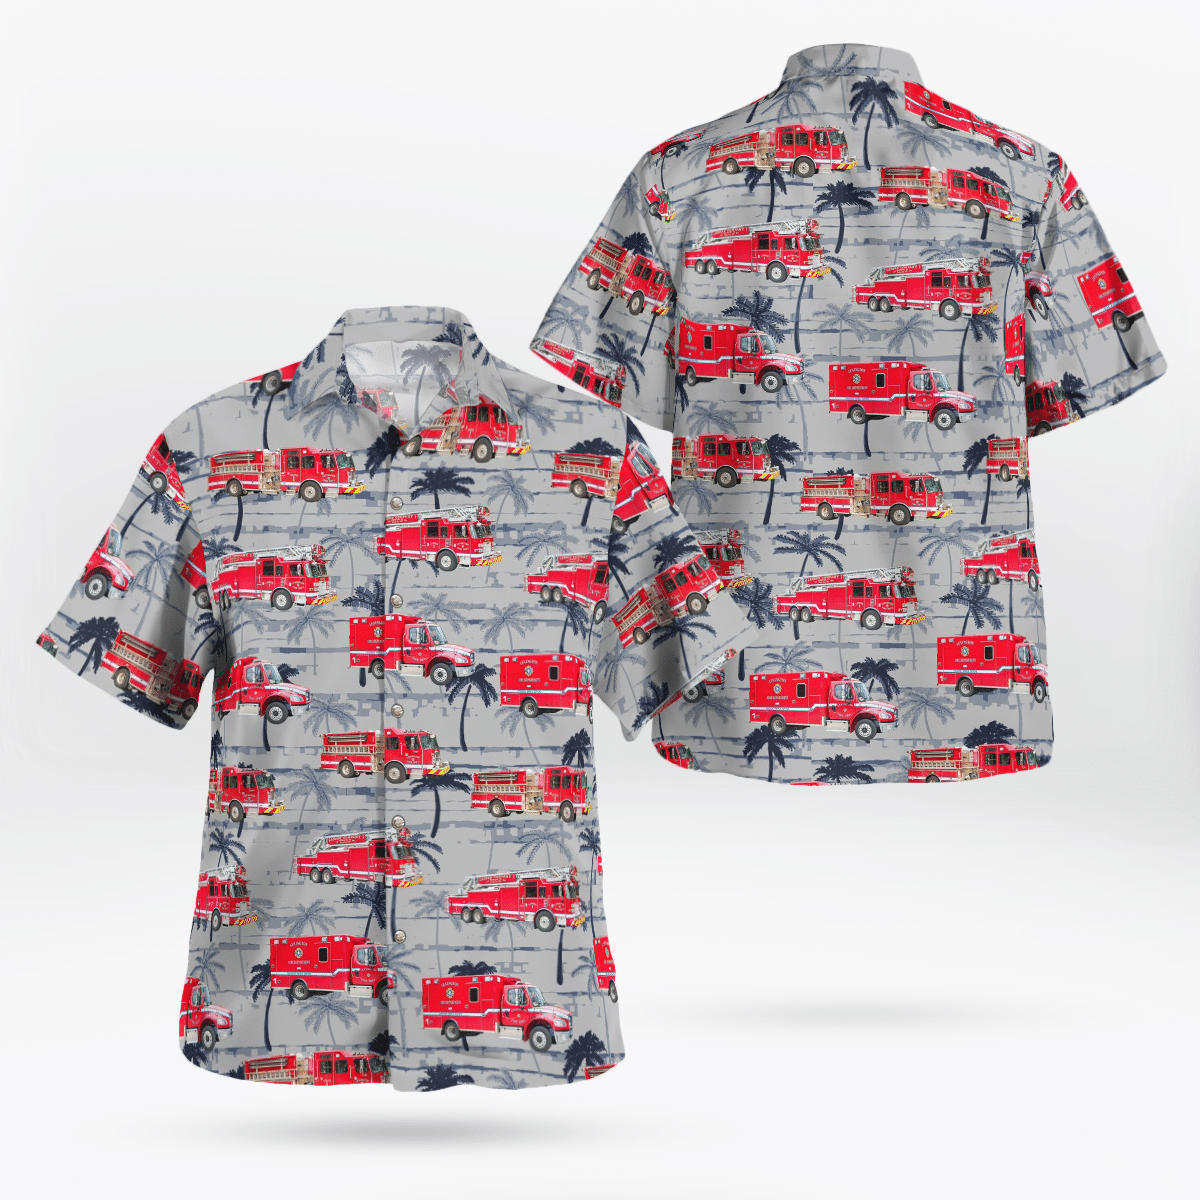 If you are in need of a new summertime look, pick up this Hawaiian shirt 71